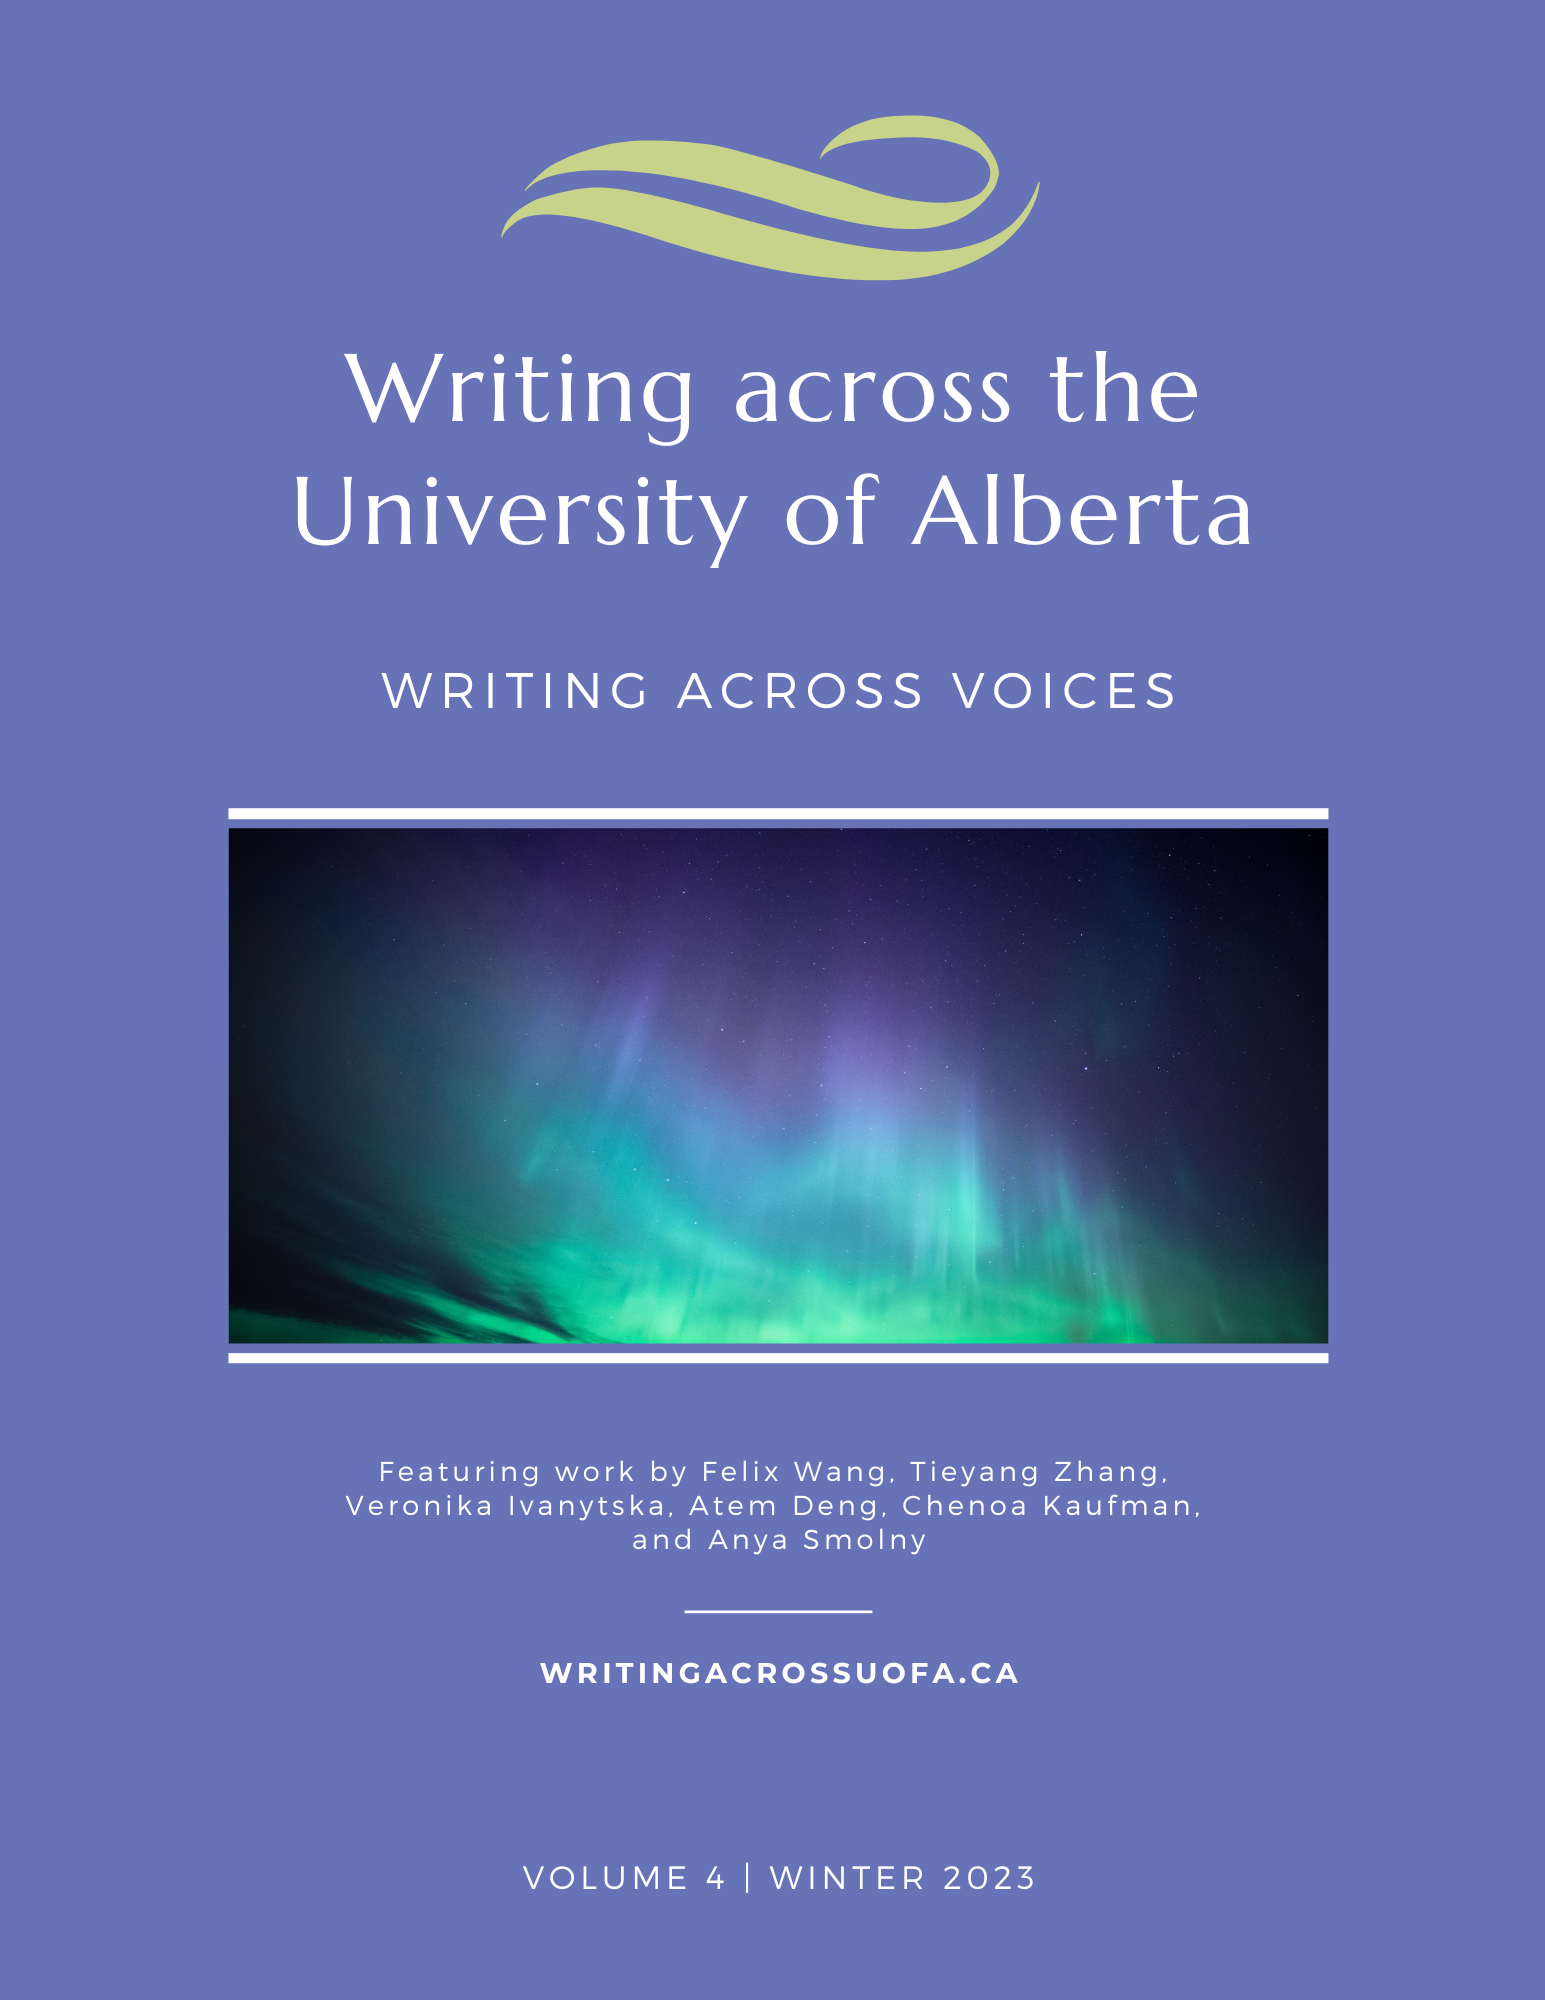 Cover image for Volume 4 of Writing across the University of Alberta. Feature scenic image of northern lights and names of authors